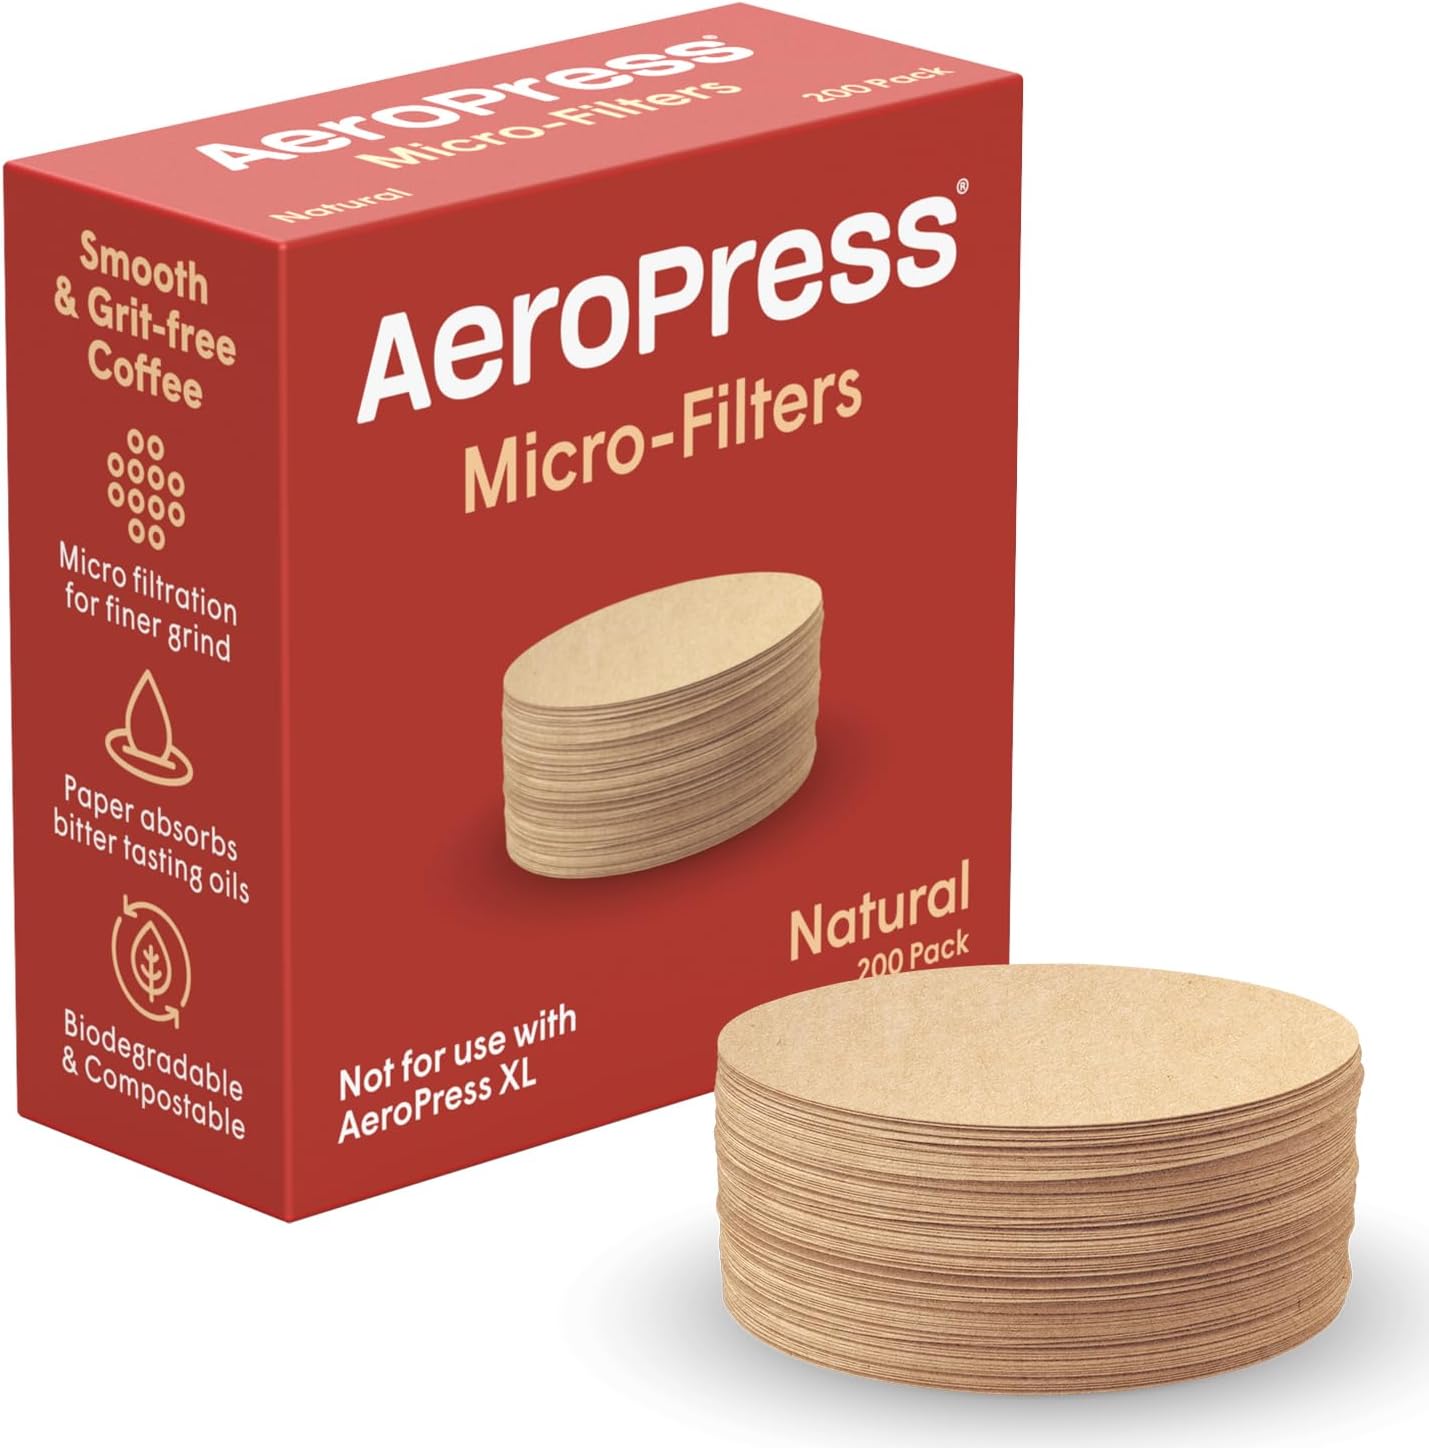 AeroPress Natural Paper Microfilters, AeroPress Coffee Filters, Unbleached Round Paper Filters for Coffee Makers, Must-Have Coffee Accessories, Standard, 1 Pack, 200 Count